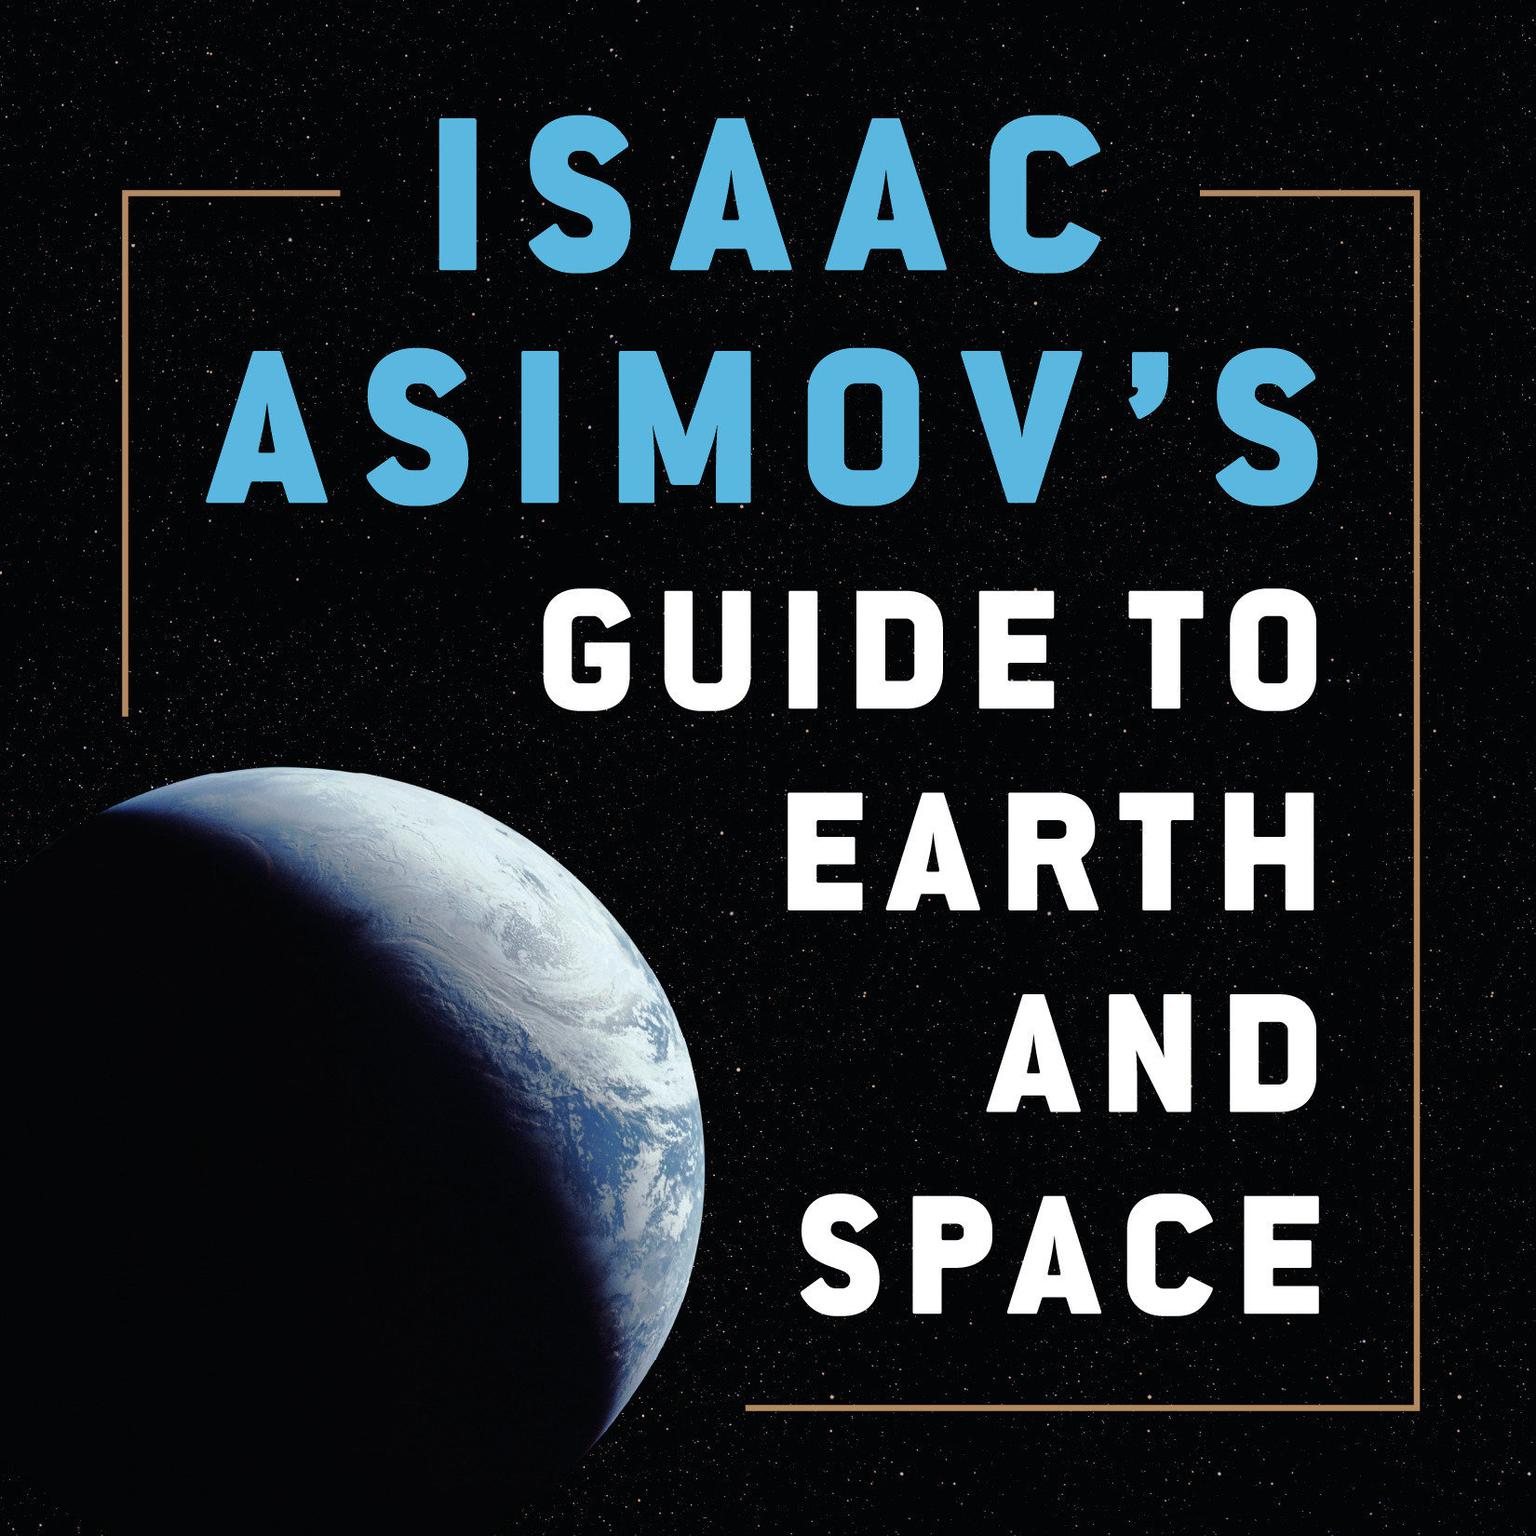 Isaac Asimovs Guide to Earth and Space Audiobook, by Isaac Asimov